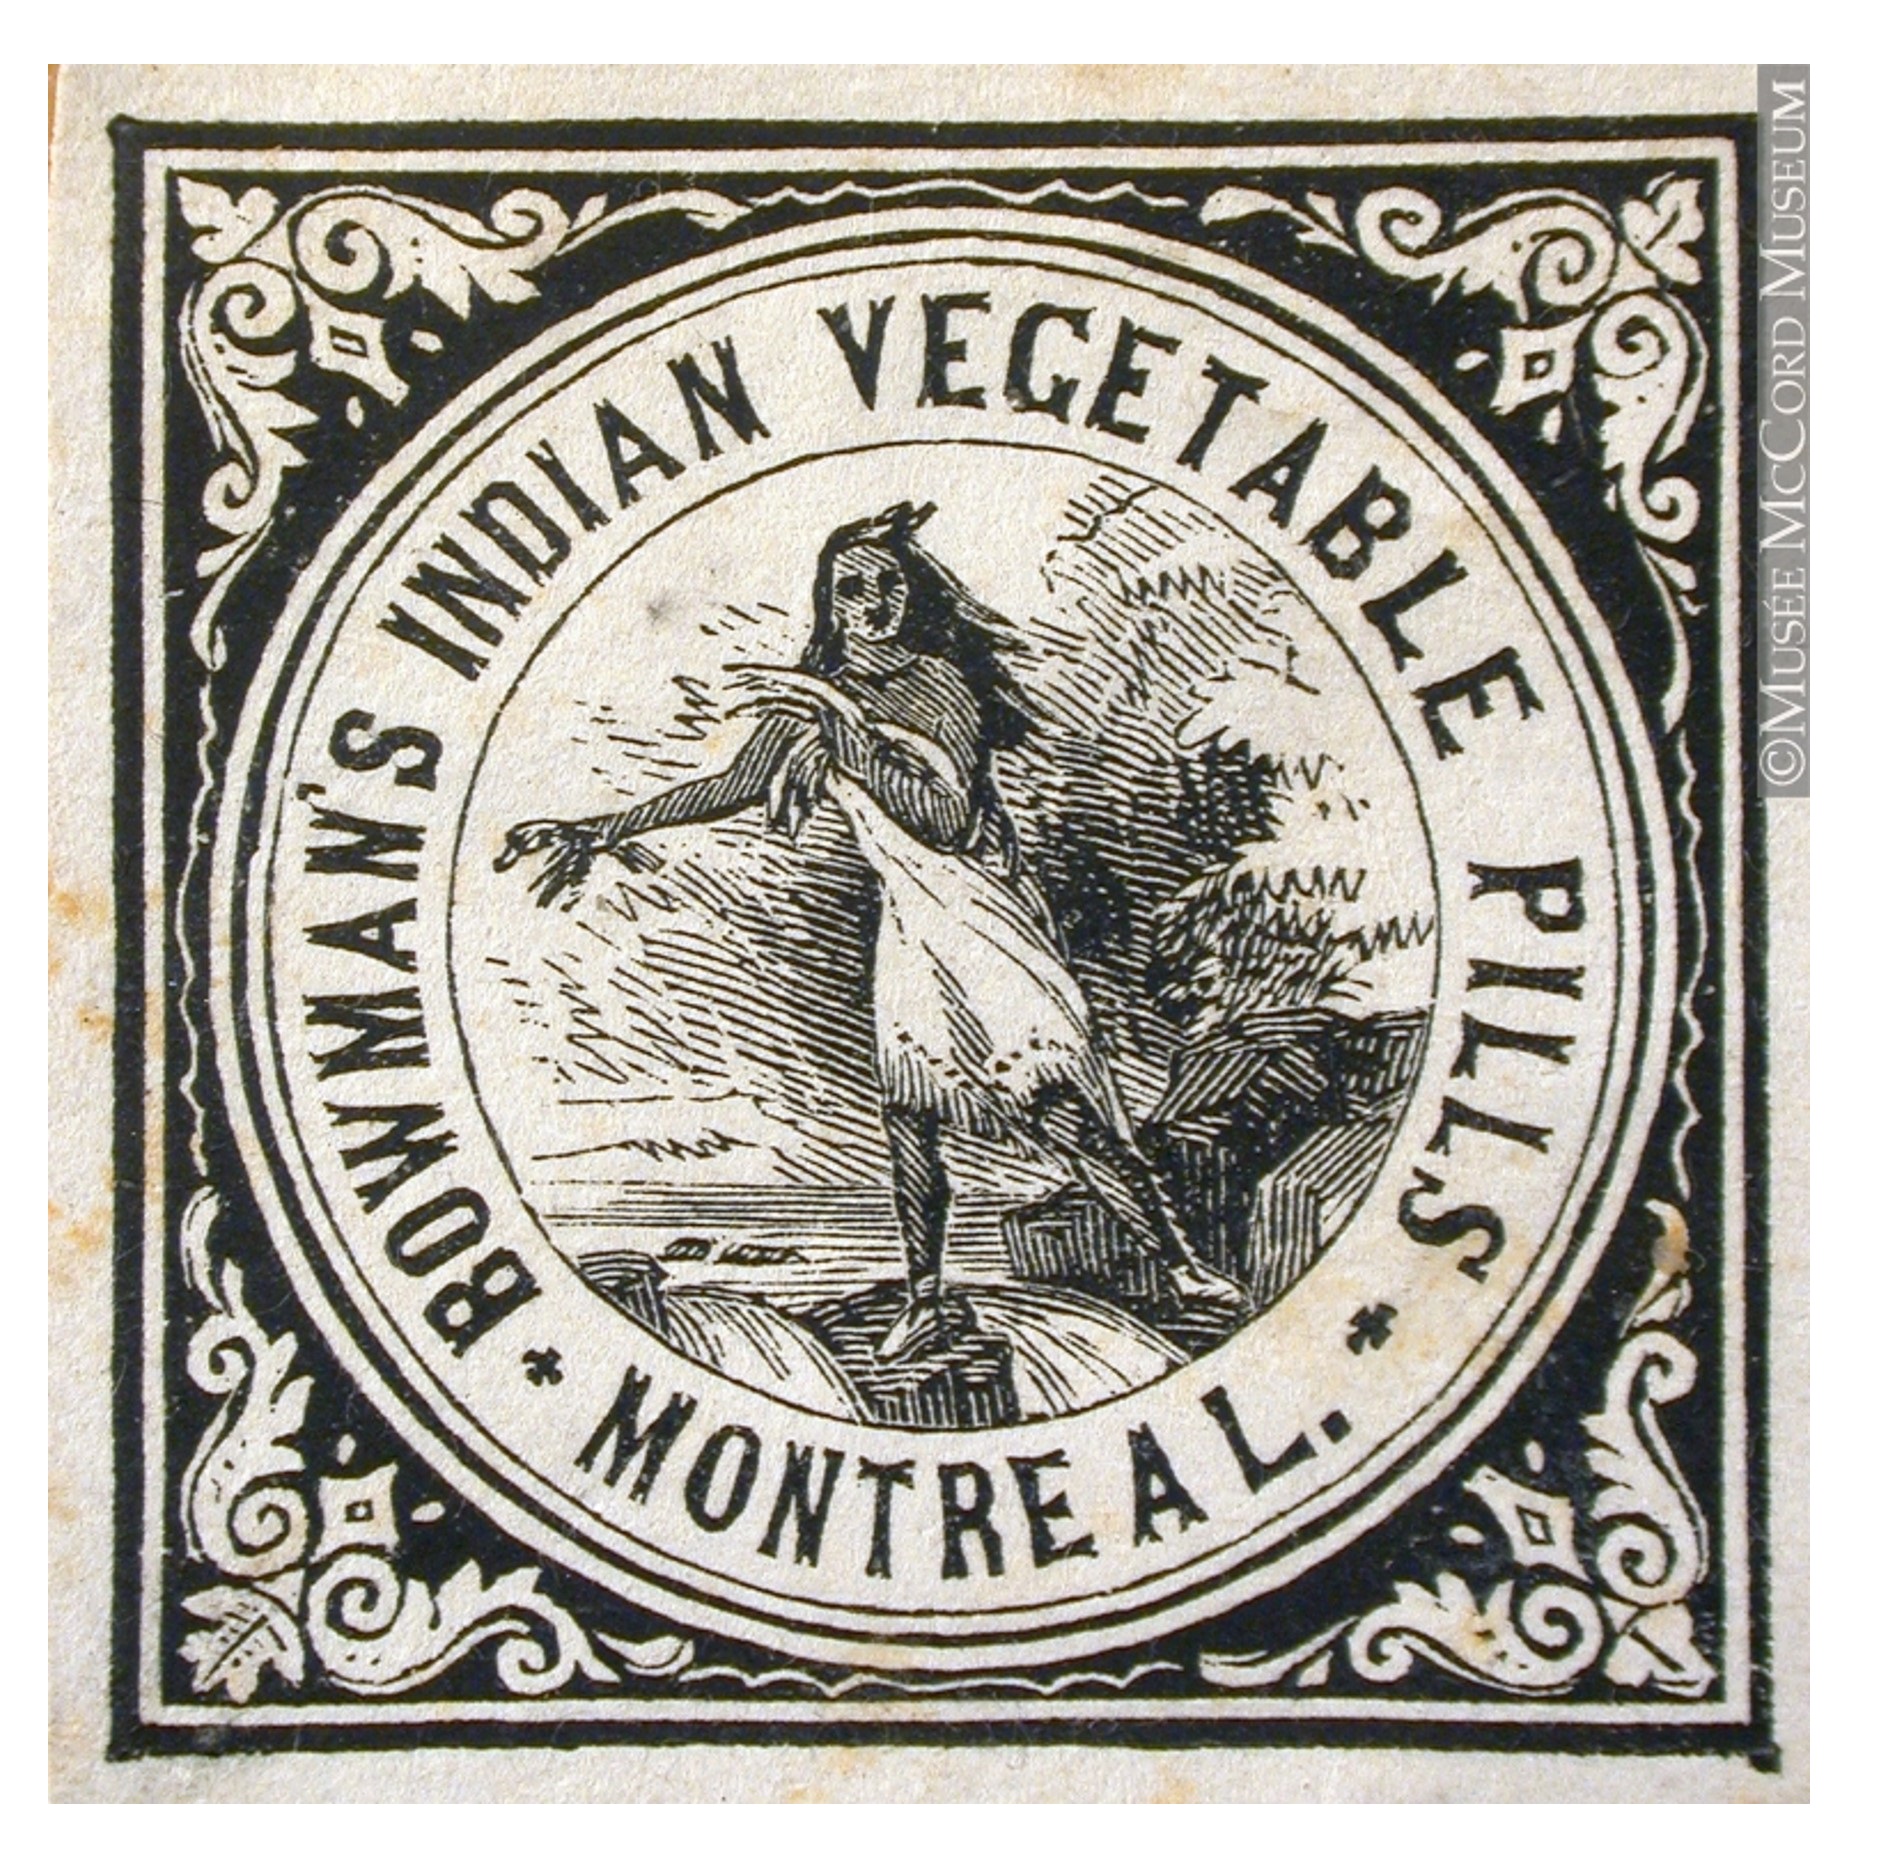 McCord Museum, M930.50.1.893, Commercial label of Bowman's Indian Vegetable Pills